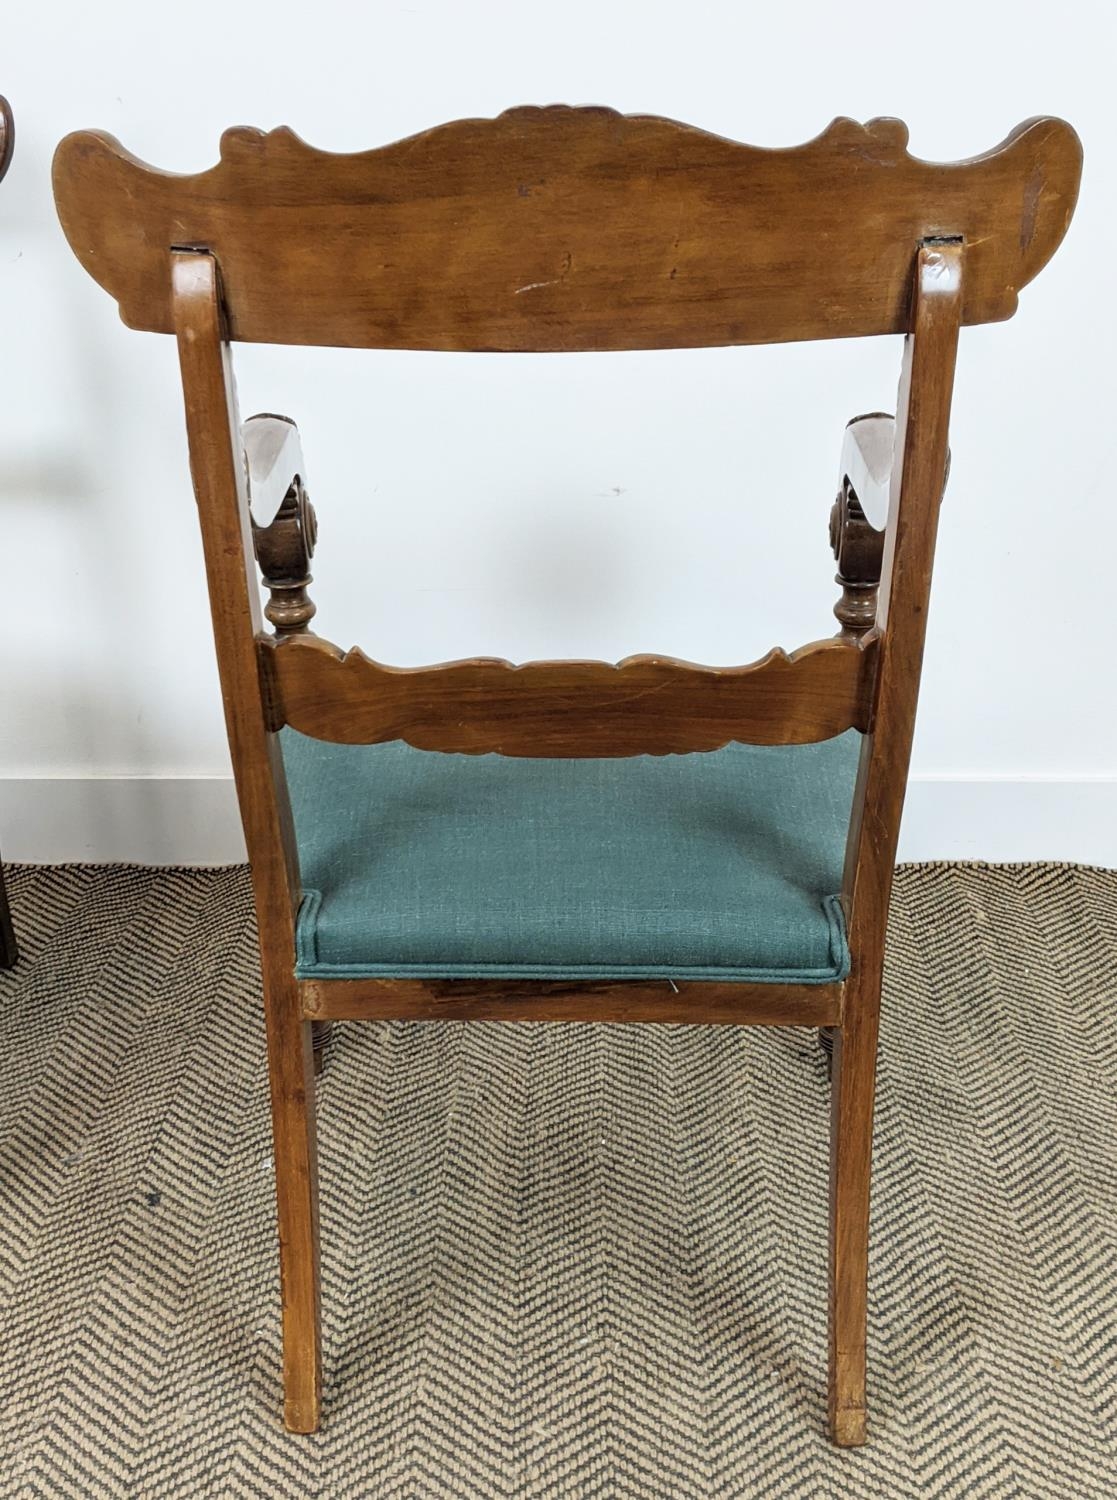 ARMCHAIRS, a pair, mid 19th century mahogany with green stuffover seats, 91cm H x 58cm x 58cm. (2) - Image 16 of 18